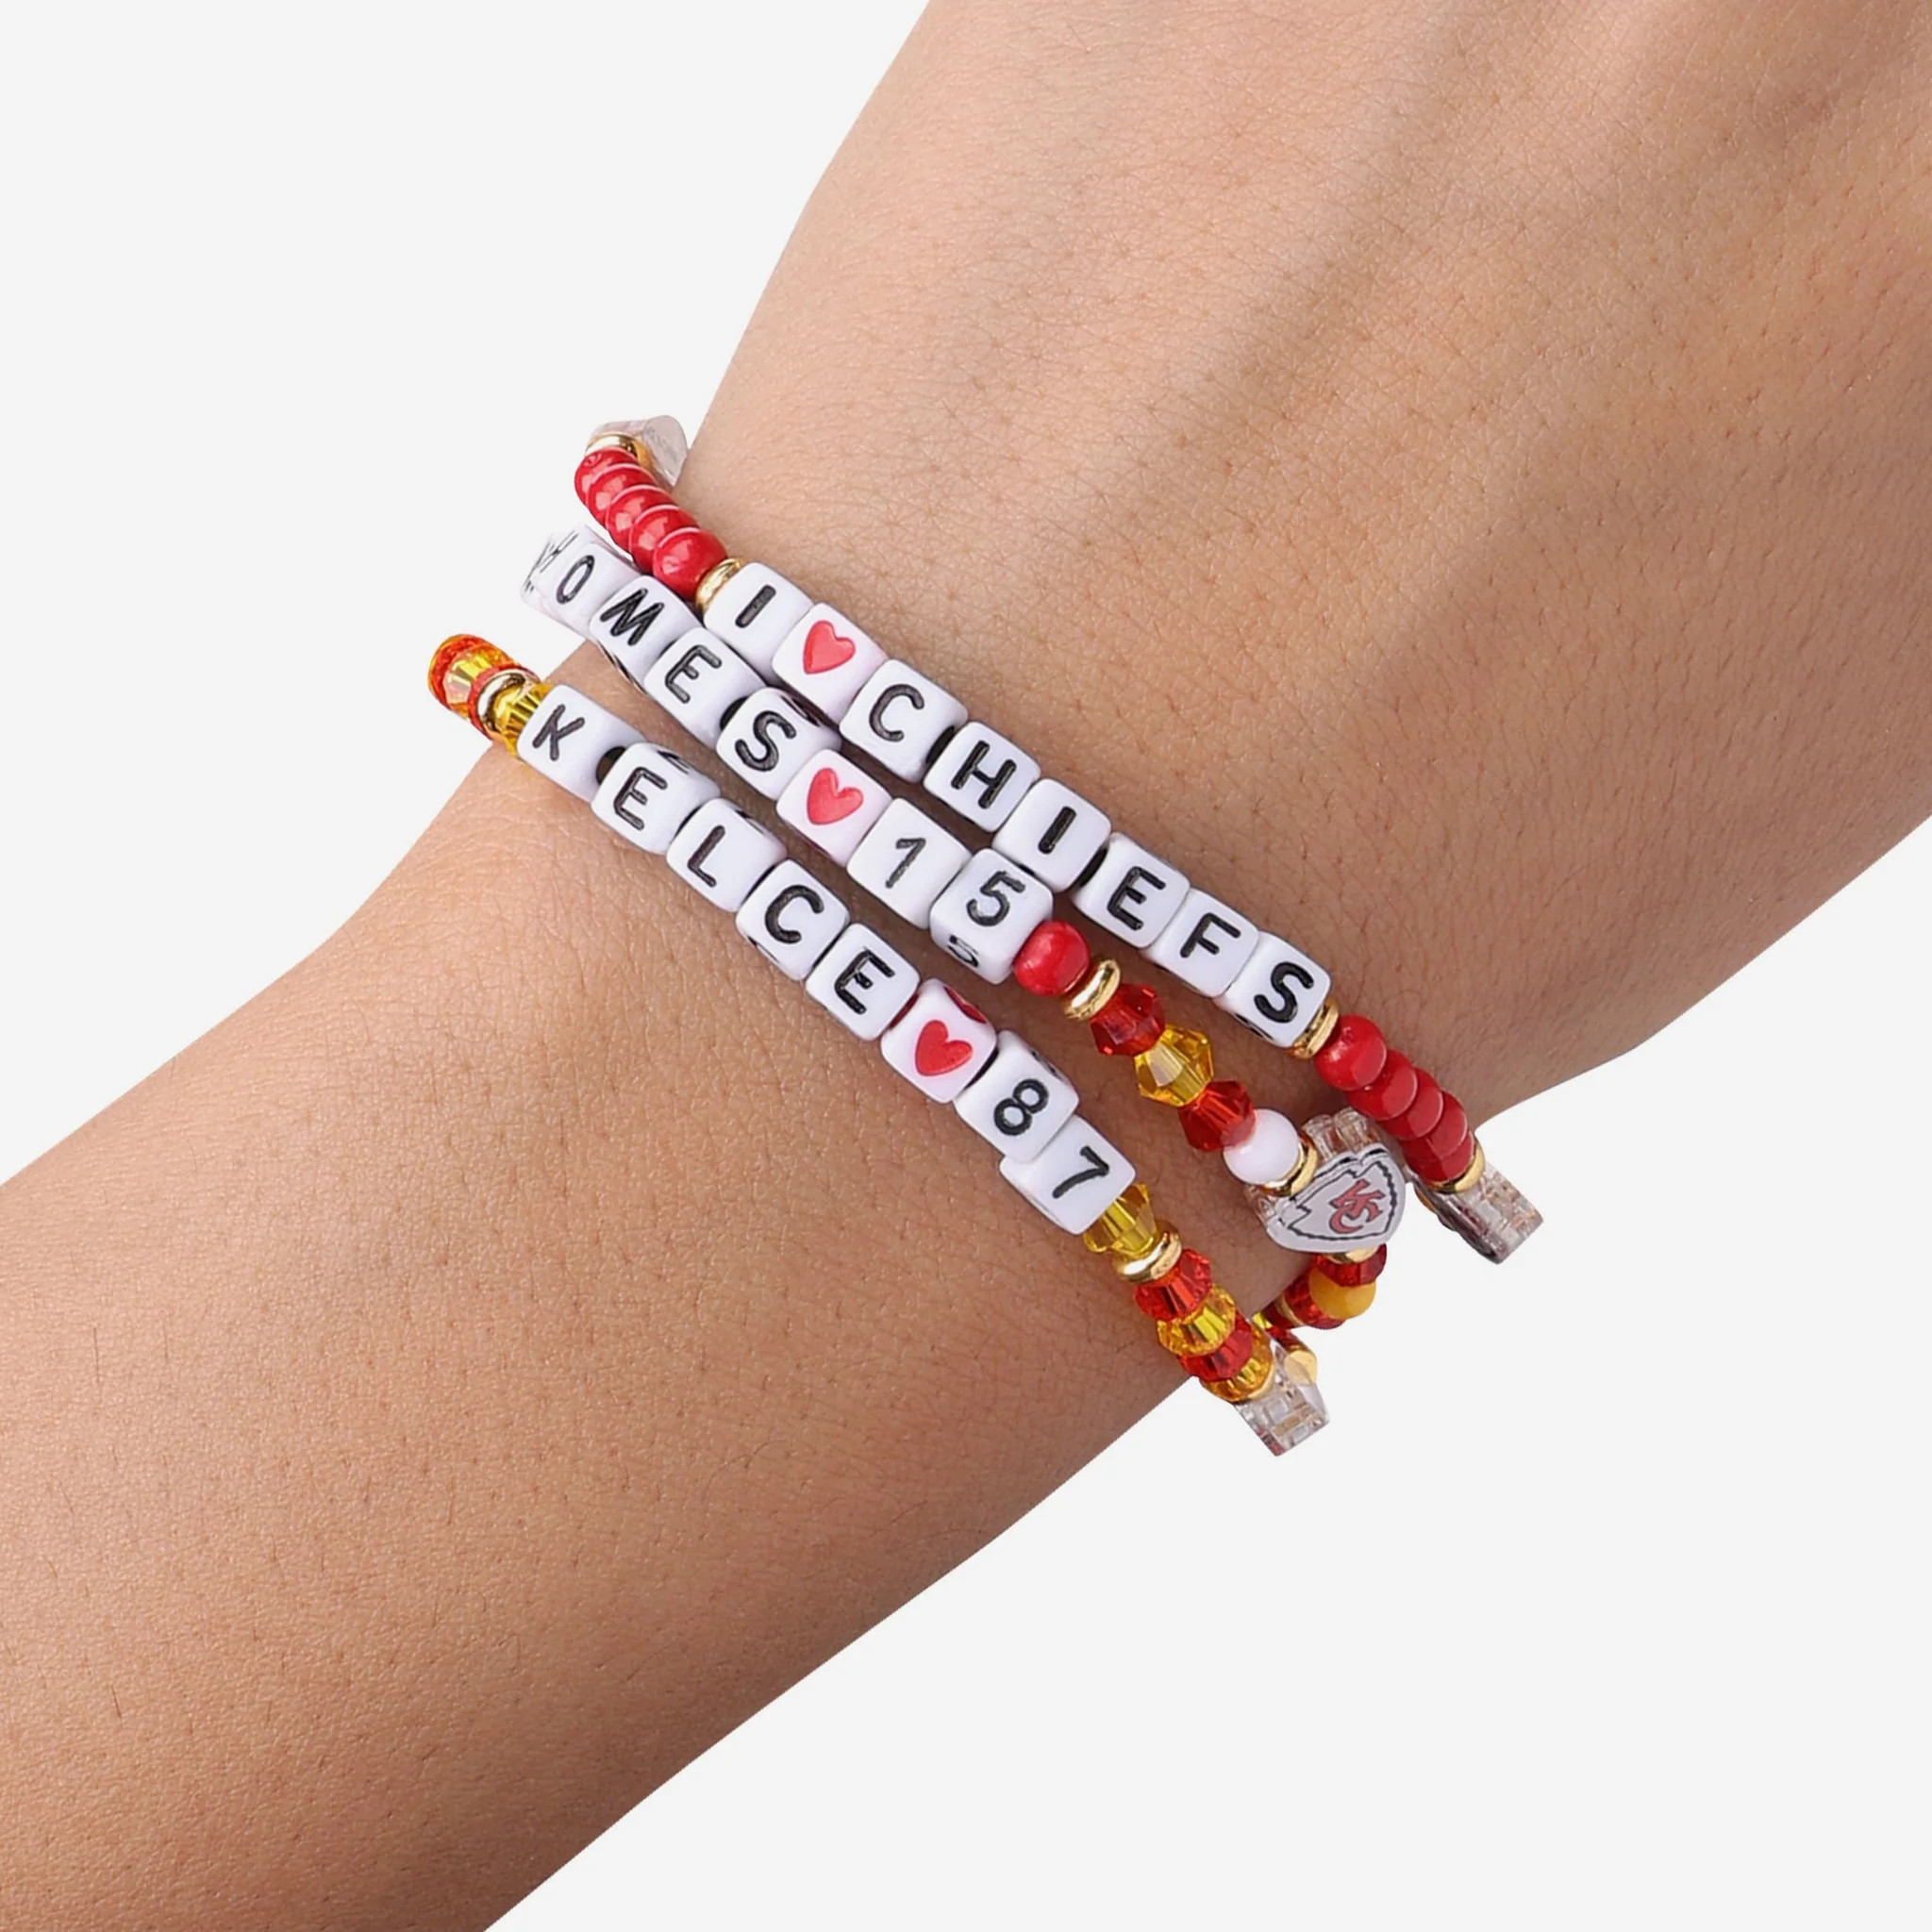 16pcs Taylor swift Music Fans Inspired Friendship Bracelets Set Accessories  for Women Fearless Folklore Midnights Red Lover - AliExpress